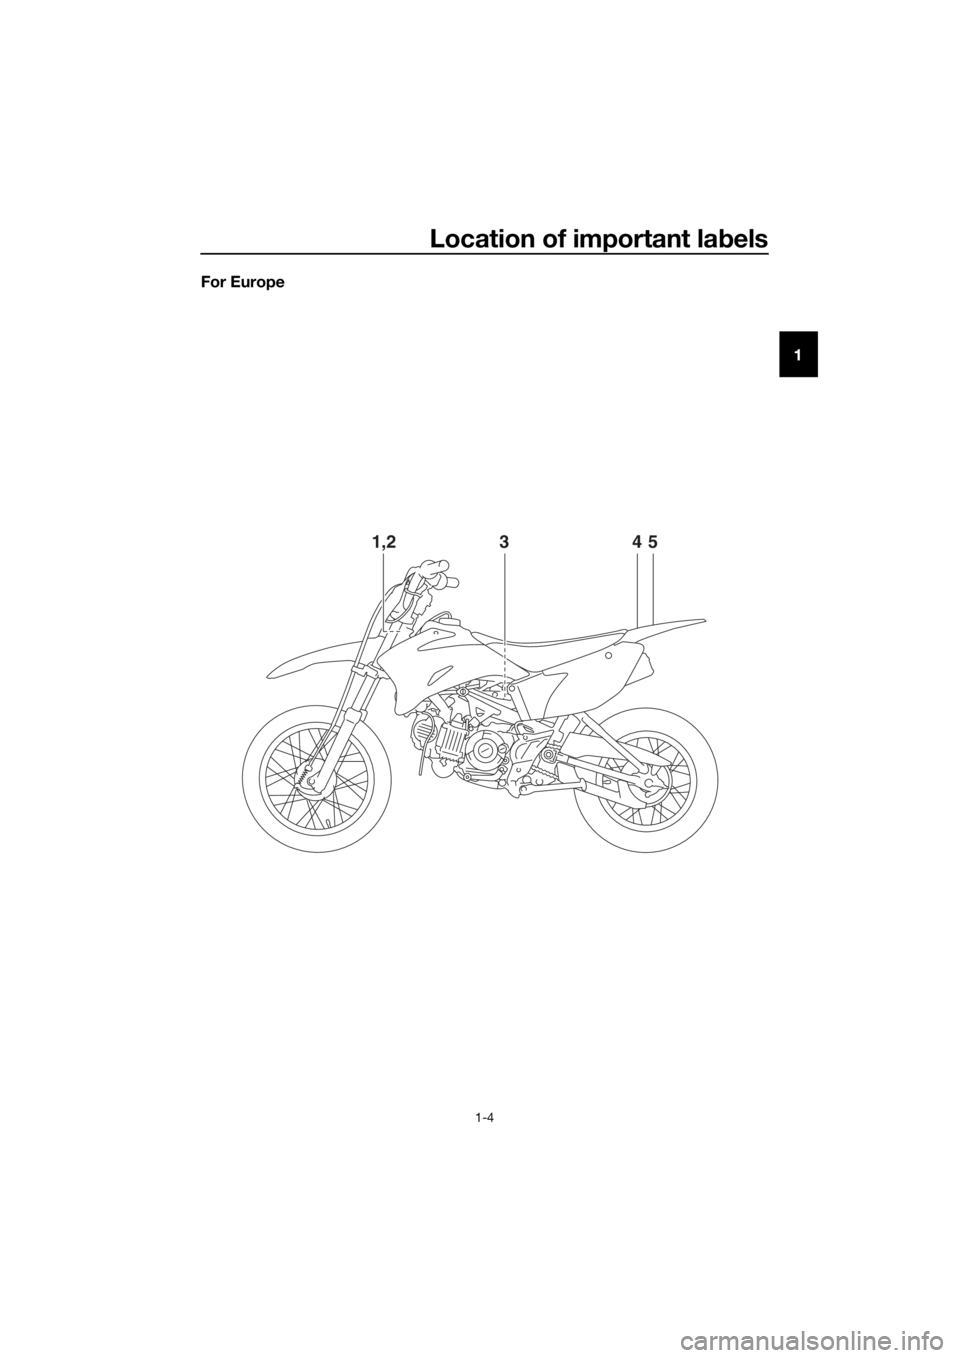 YAMAHA TT-R110E 2020 User Guide Location of important labels
1-4
1
For Europe
4
1,253
UB5185E0.book  Page 4  Monday, June 17, 2019  9:04 AM 